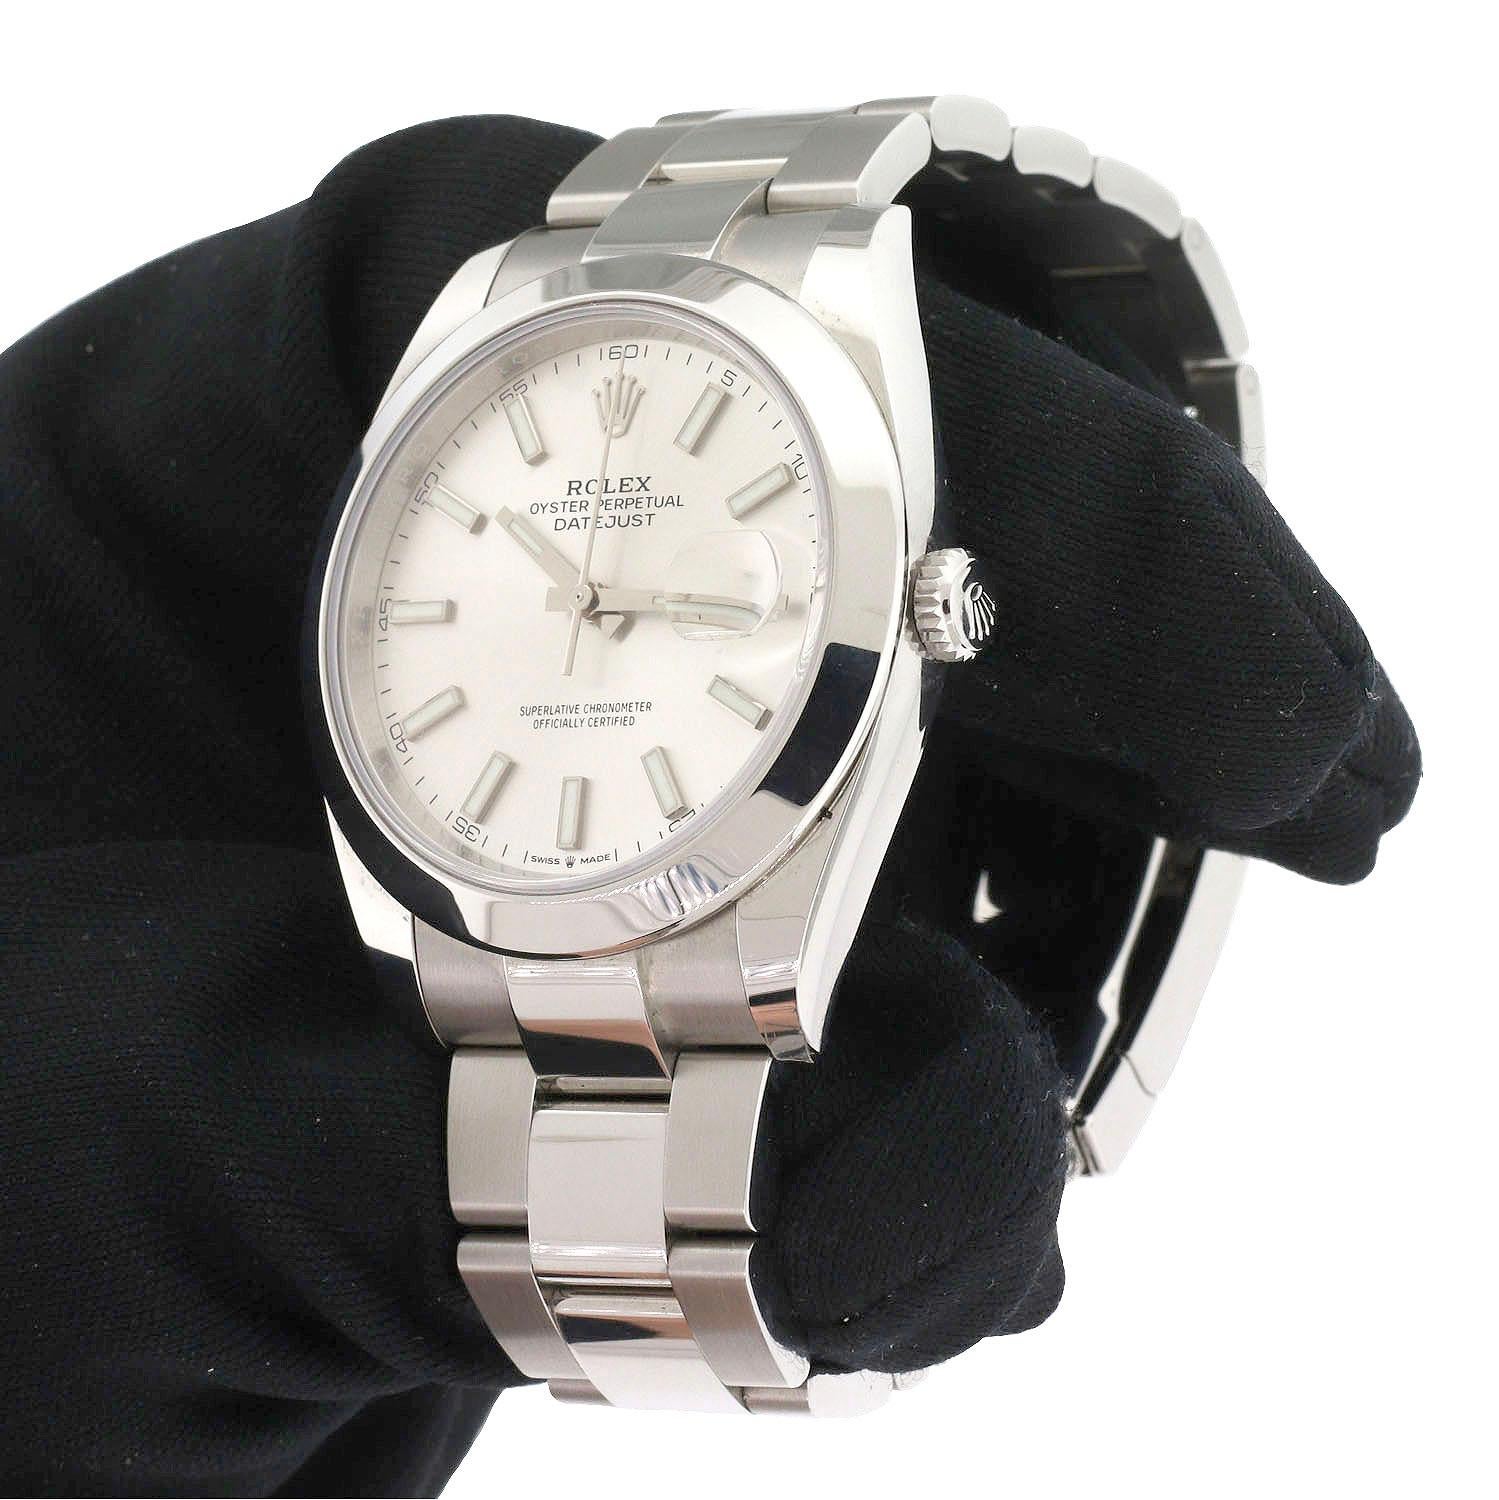 Rolex 126300 Datejust 41 Silver Dial Stainless Steel Watch In New Condition For Sale In Boca Raton, FL